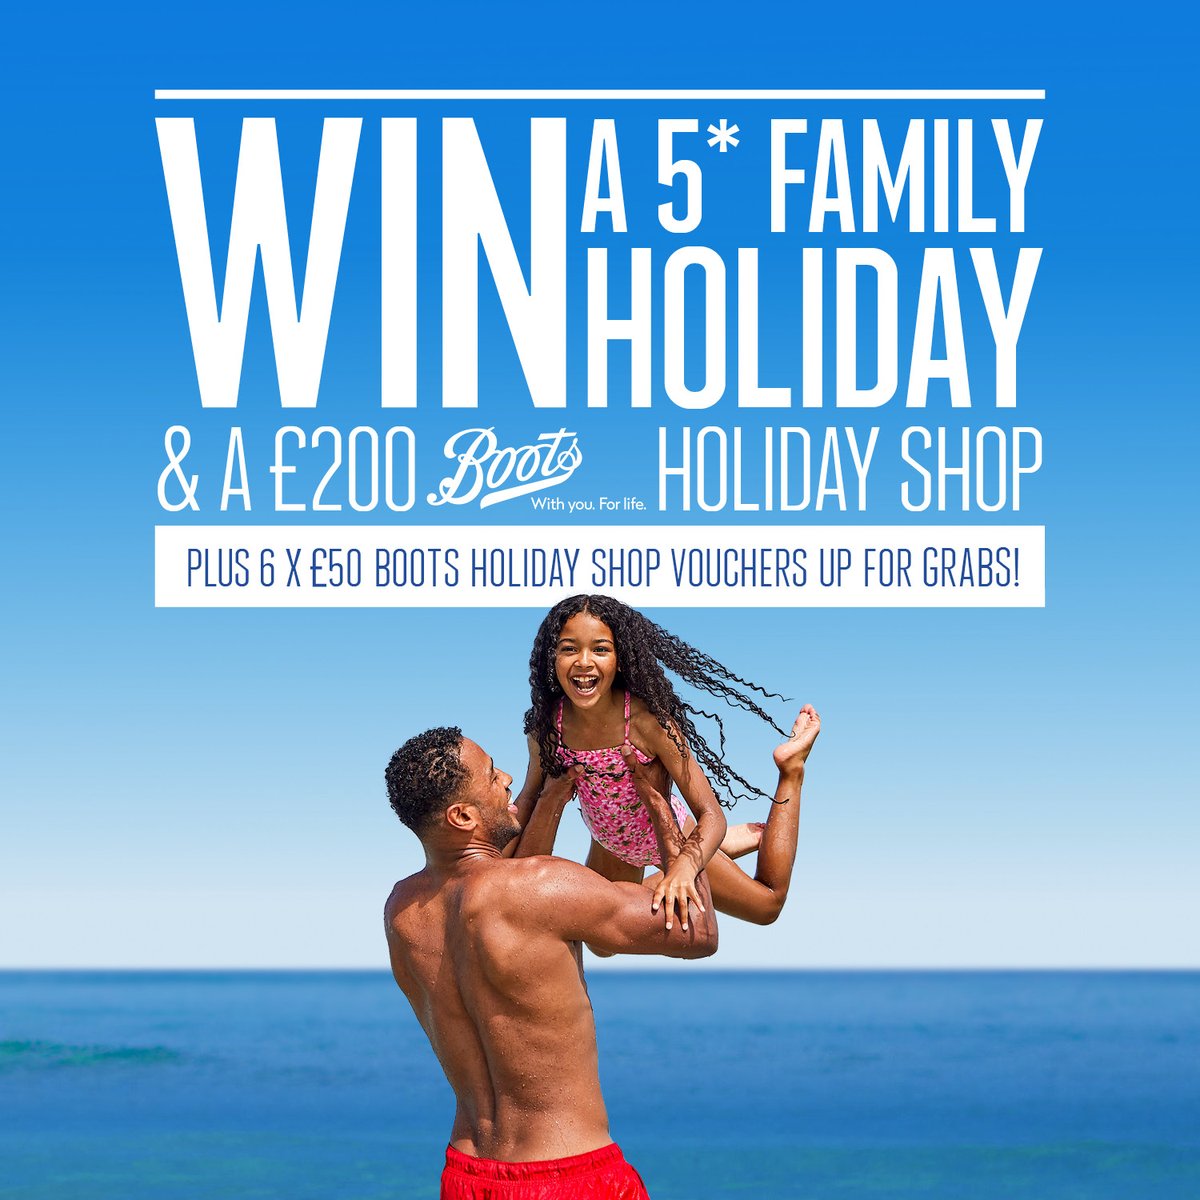 Fancy the chance of winning a seven-night family holiday to the five-star Zafiro Hotels Palace Alcudia in Majorca? How about a Boots Holiday Shop worth £200 too? Six runners up will also bag a £50 Boots Holiday Shop voucher! 🙌 Enter here: spr.ly/6017jaNjJ